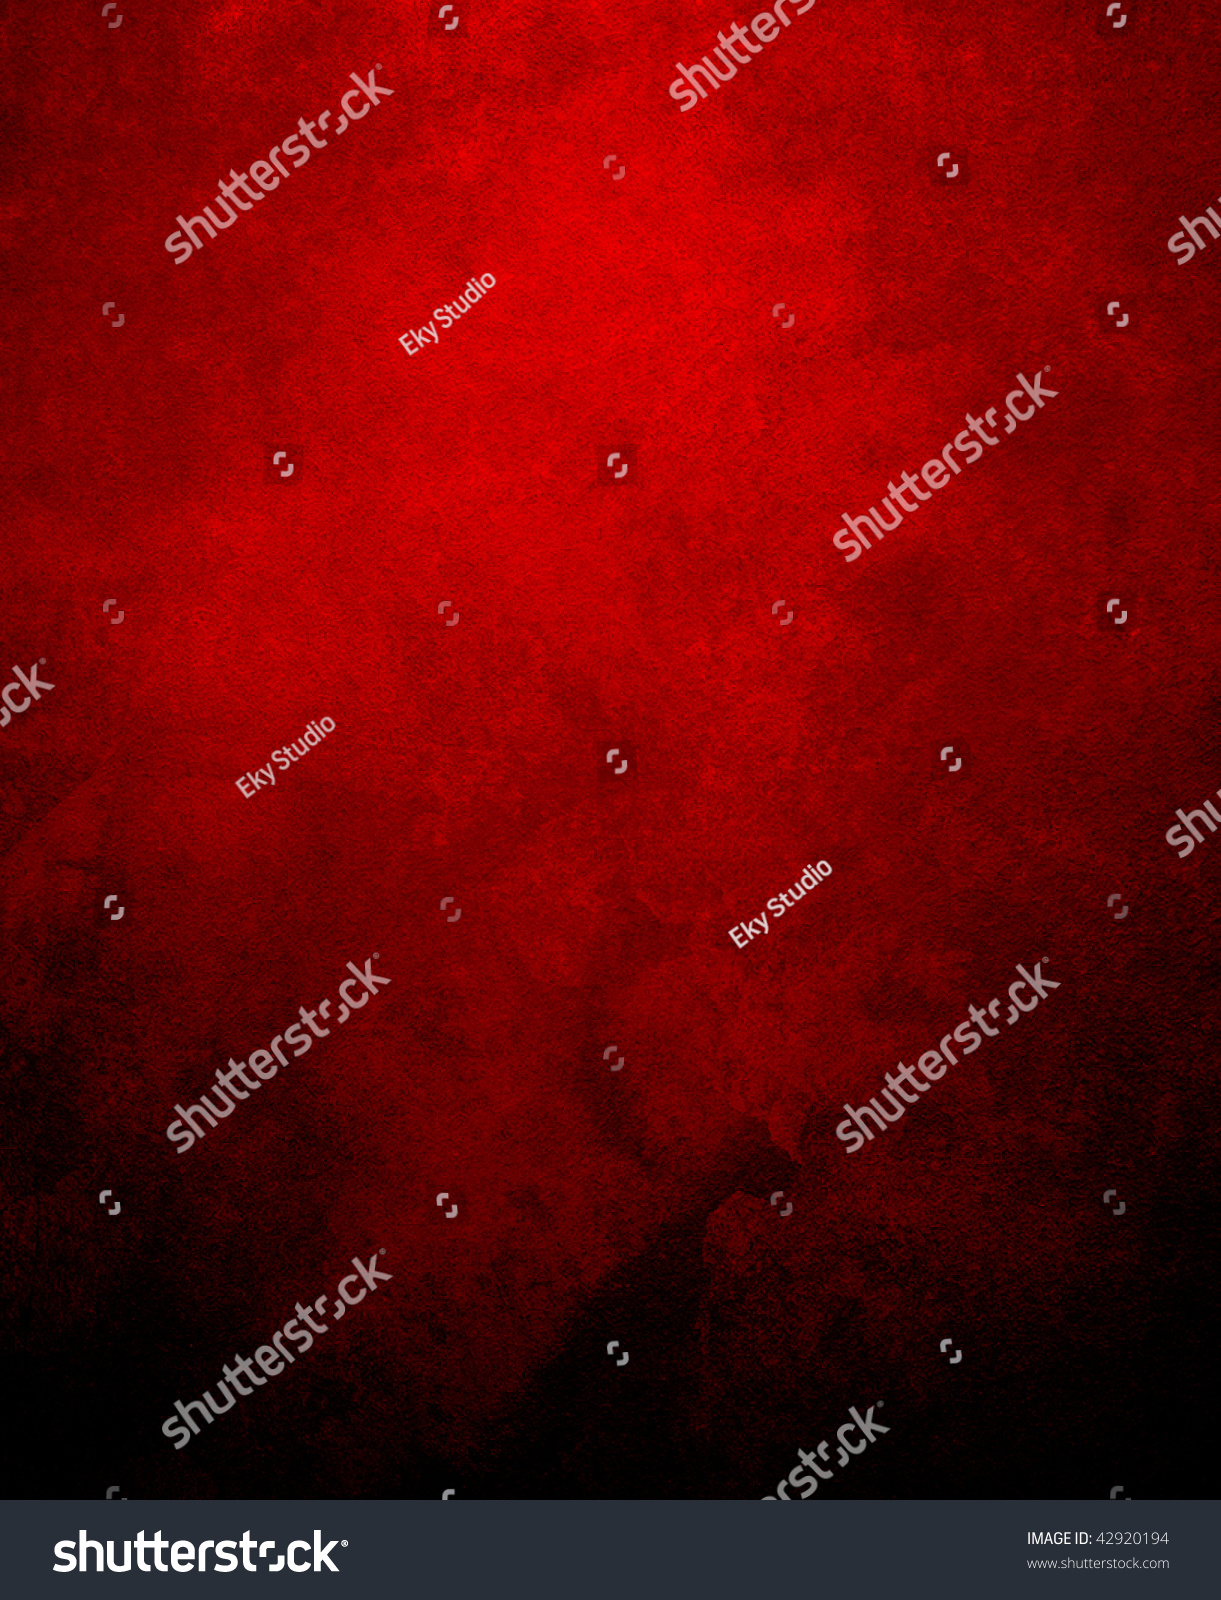 Red Paint Background Stock Photo 42920194 : Shutterstock